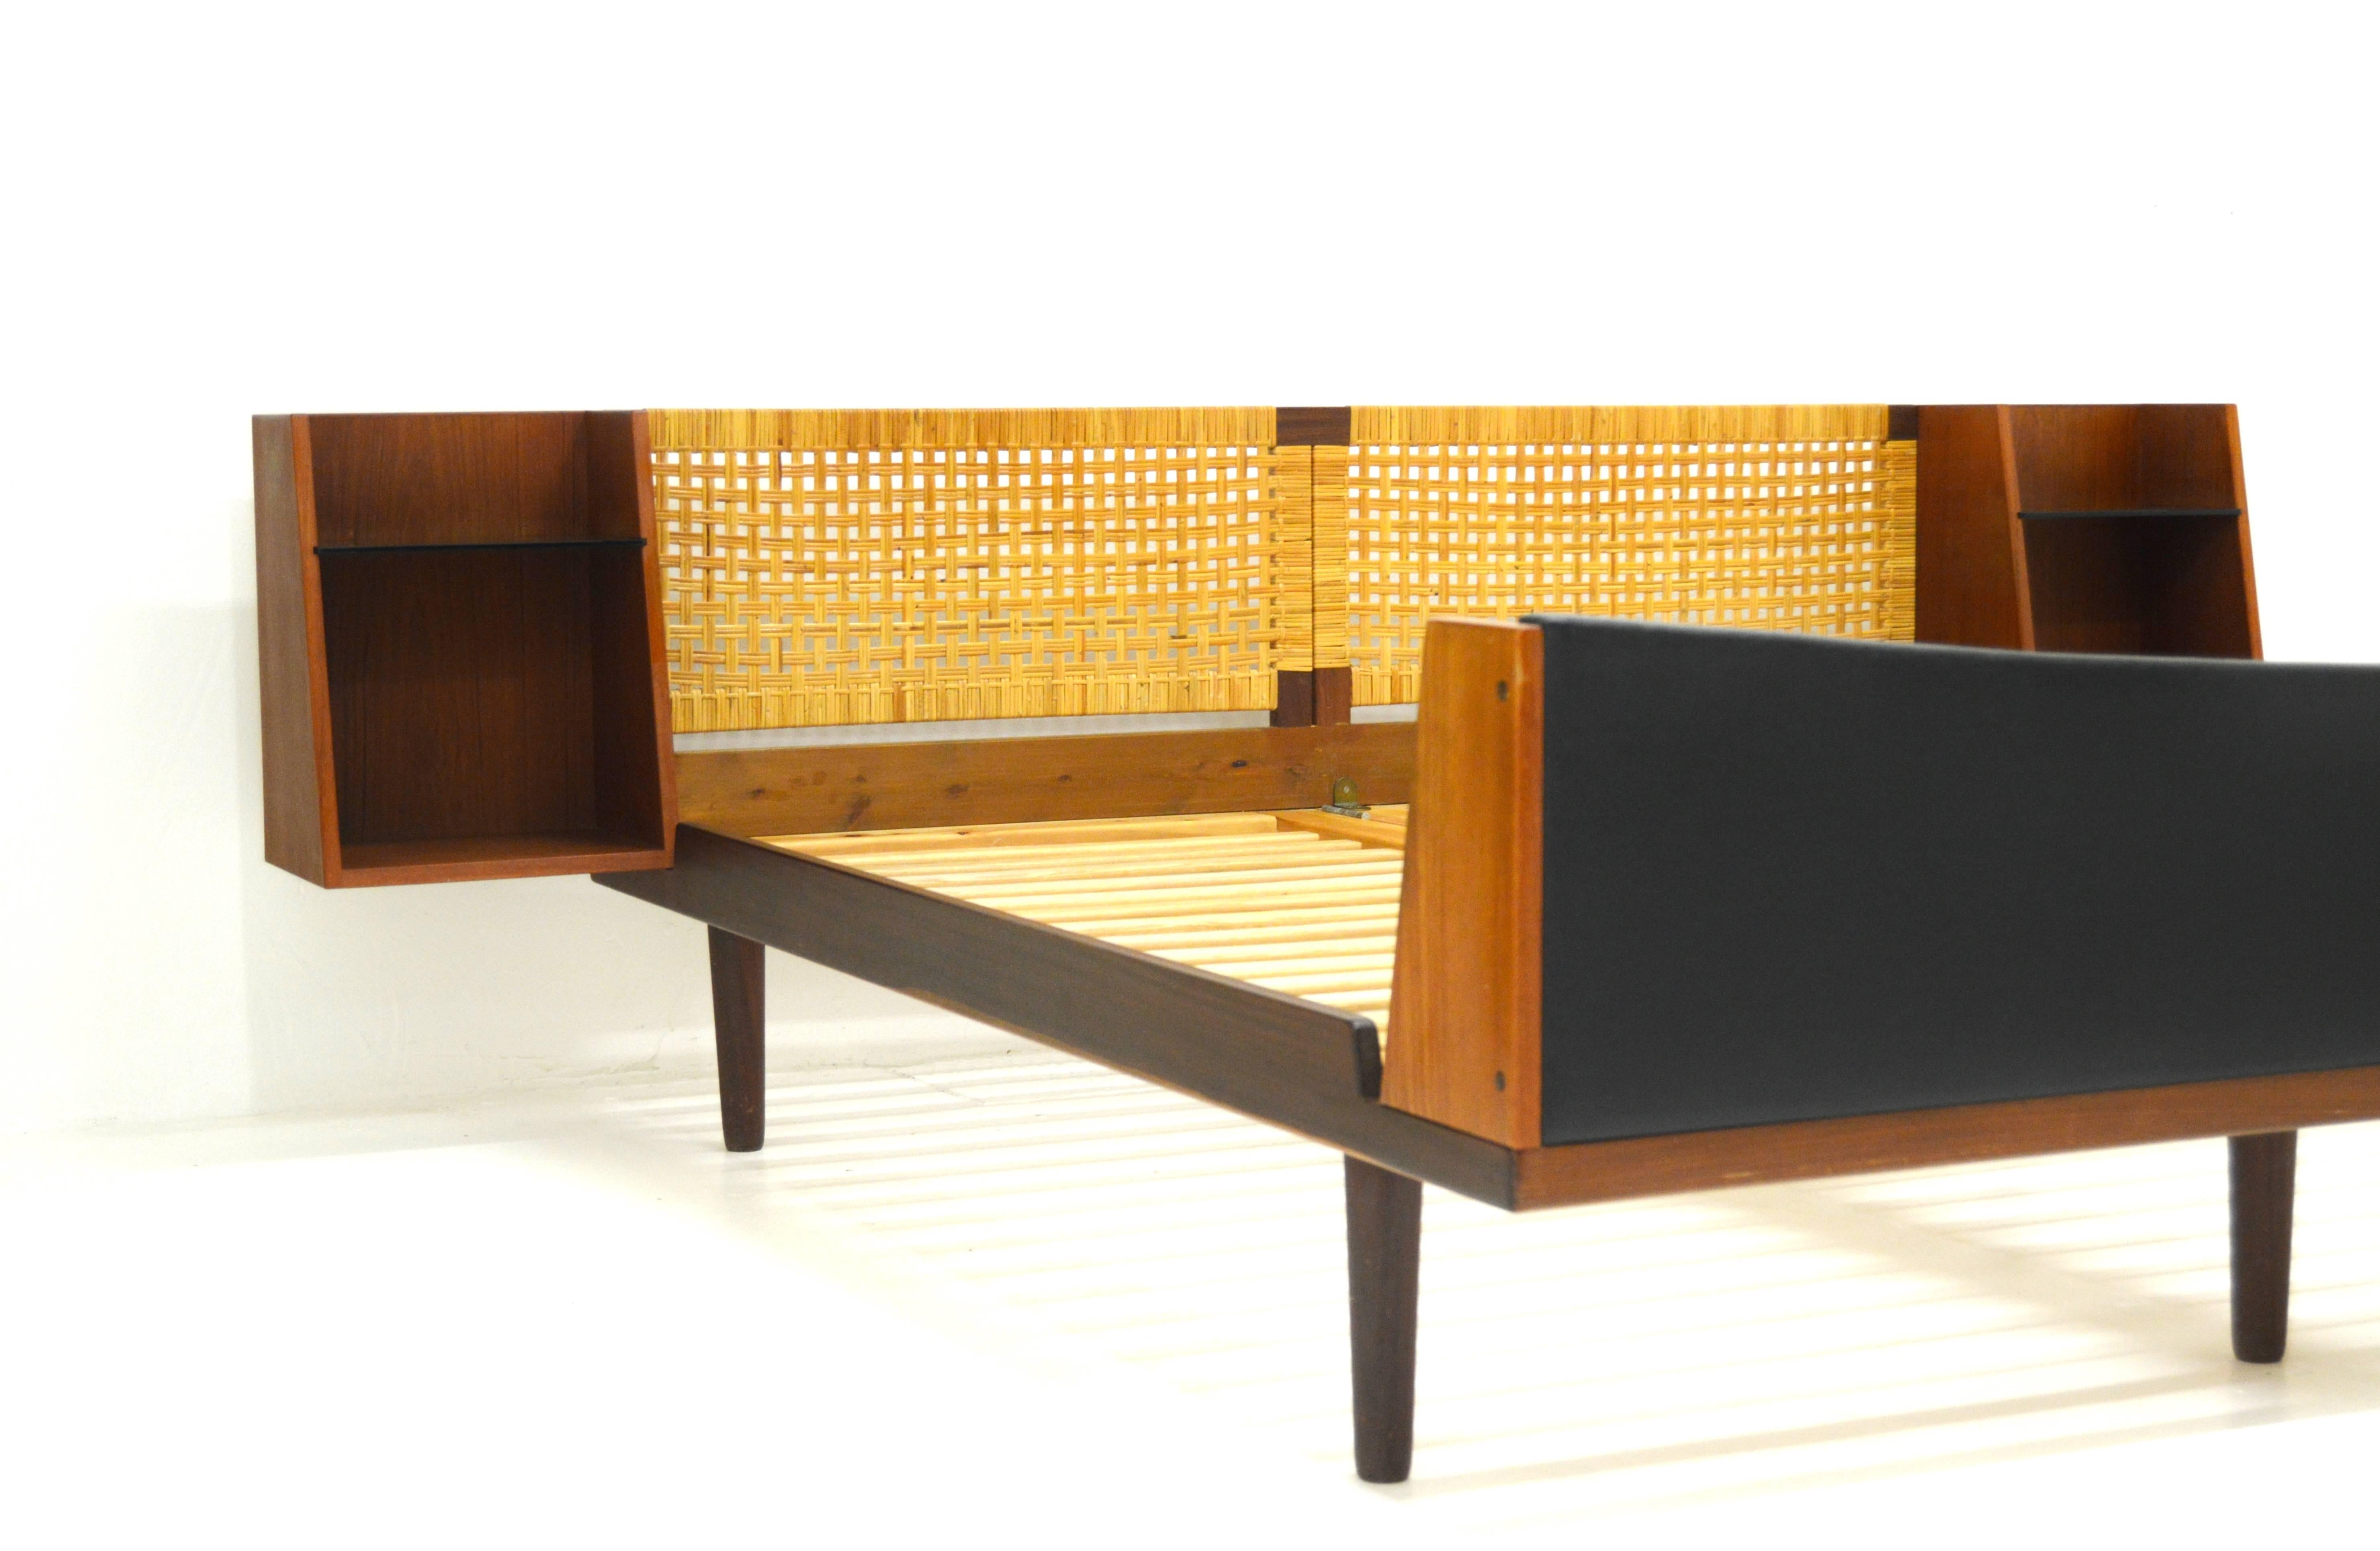 Very sober and elegant daybed from Danish GETAMA, designed by Hans J Wegner.
Rattan headboard with loating side tables with black glass shelve.
Teak base and leatherette foot end.
Very good vintage condition.
Maximum bed measurements 194 x 170